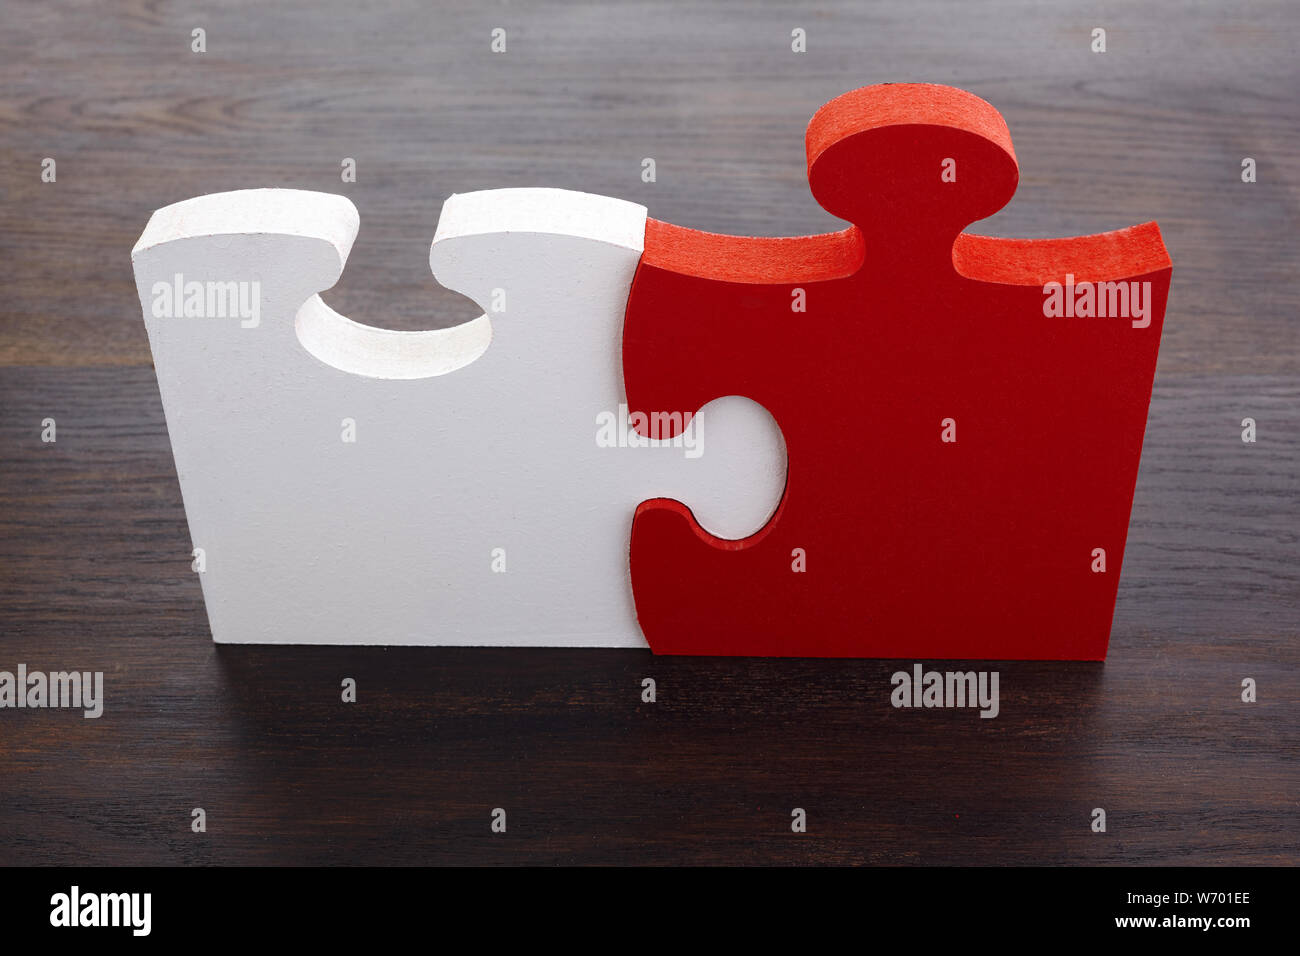 Two white and red details of puzzle on dark wooden background. Stock Photo